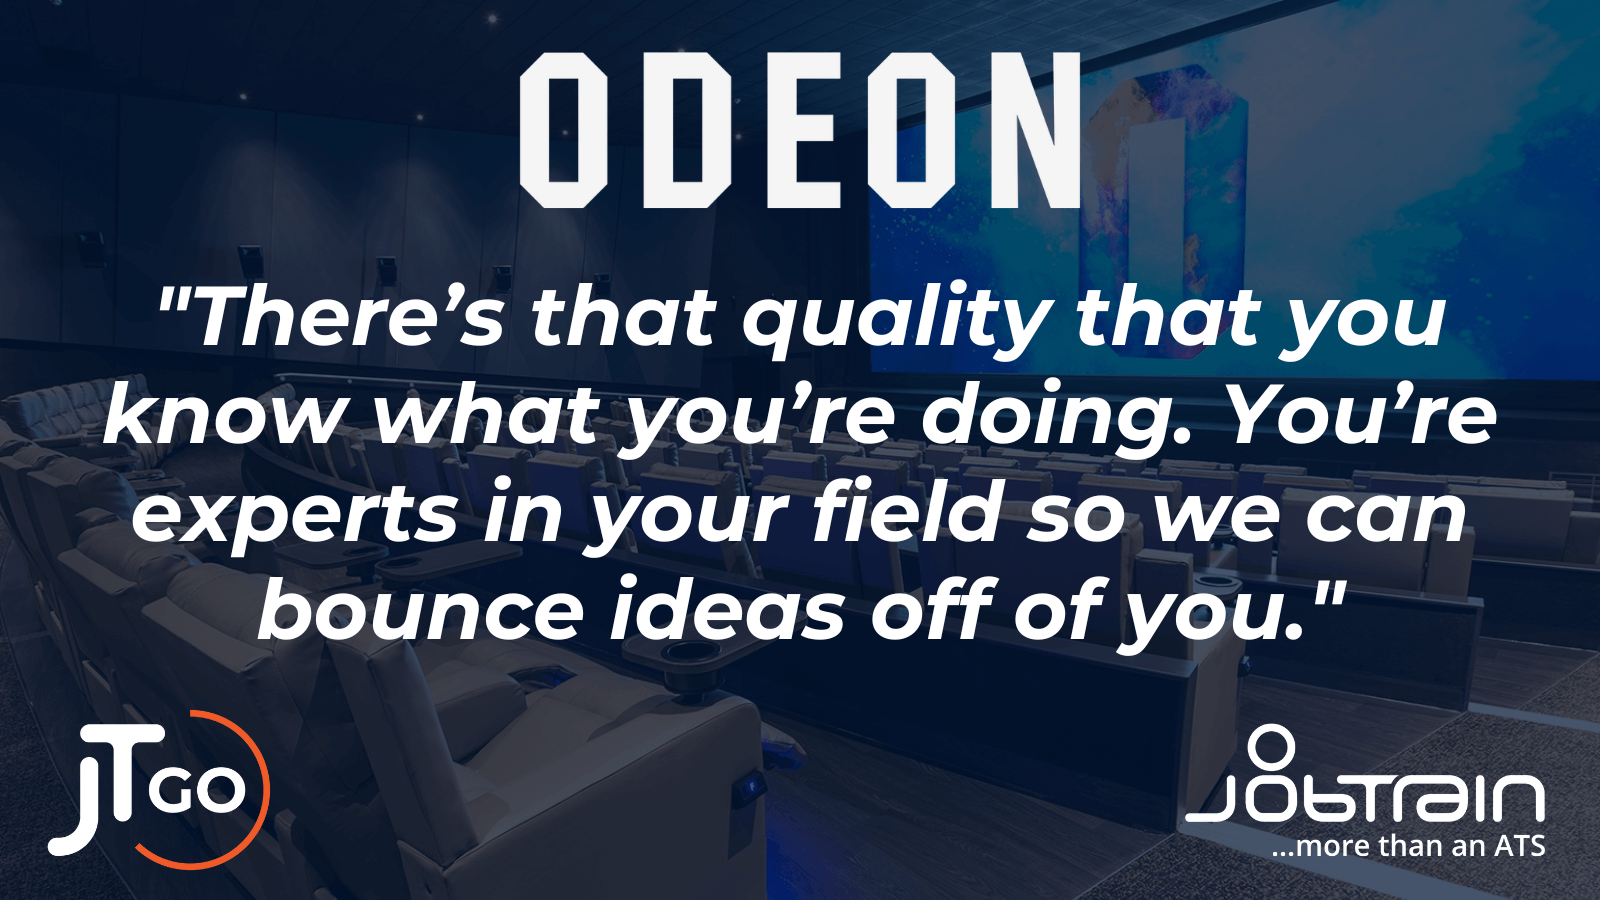 Odeon Cinemas quote - "There's that quality that you know what you're doing. You're experts in your field so we can bounce ideas off of you."